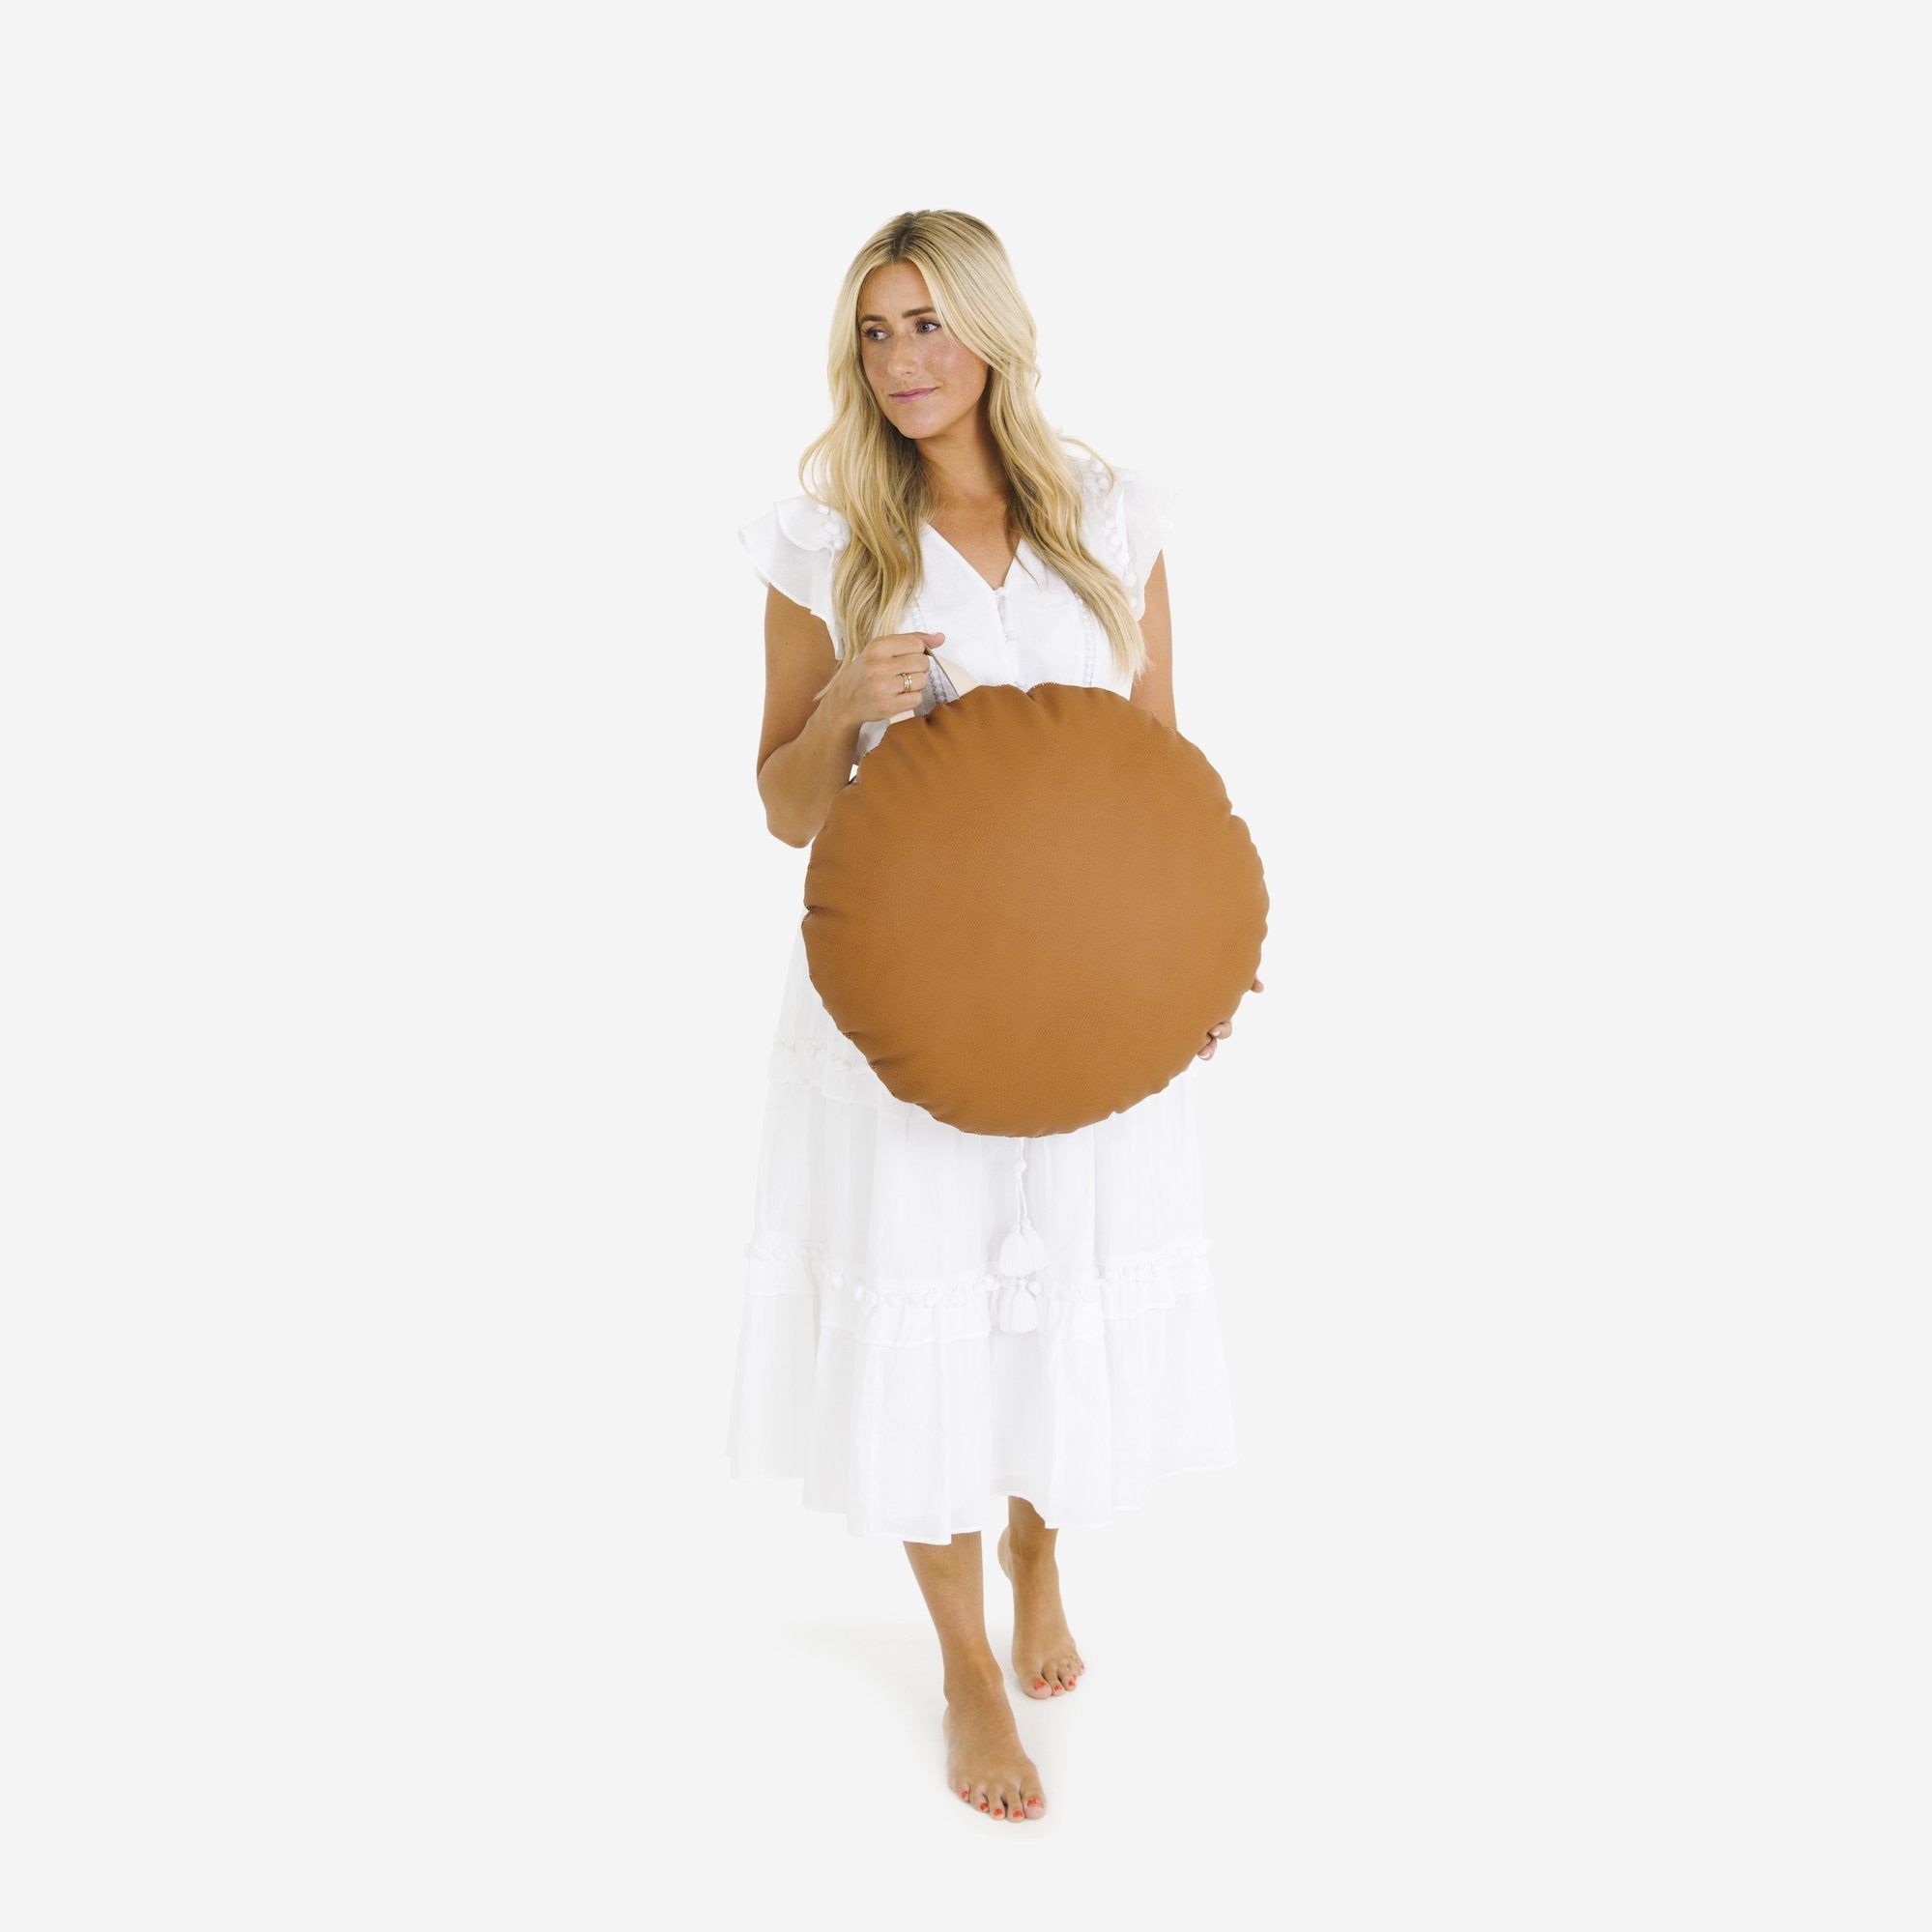 Ginger (on sale) / Circle@Woman holding the Ginger Circle Mini Floor Cushion